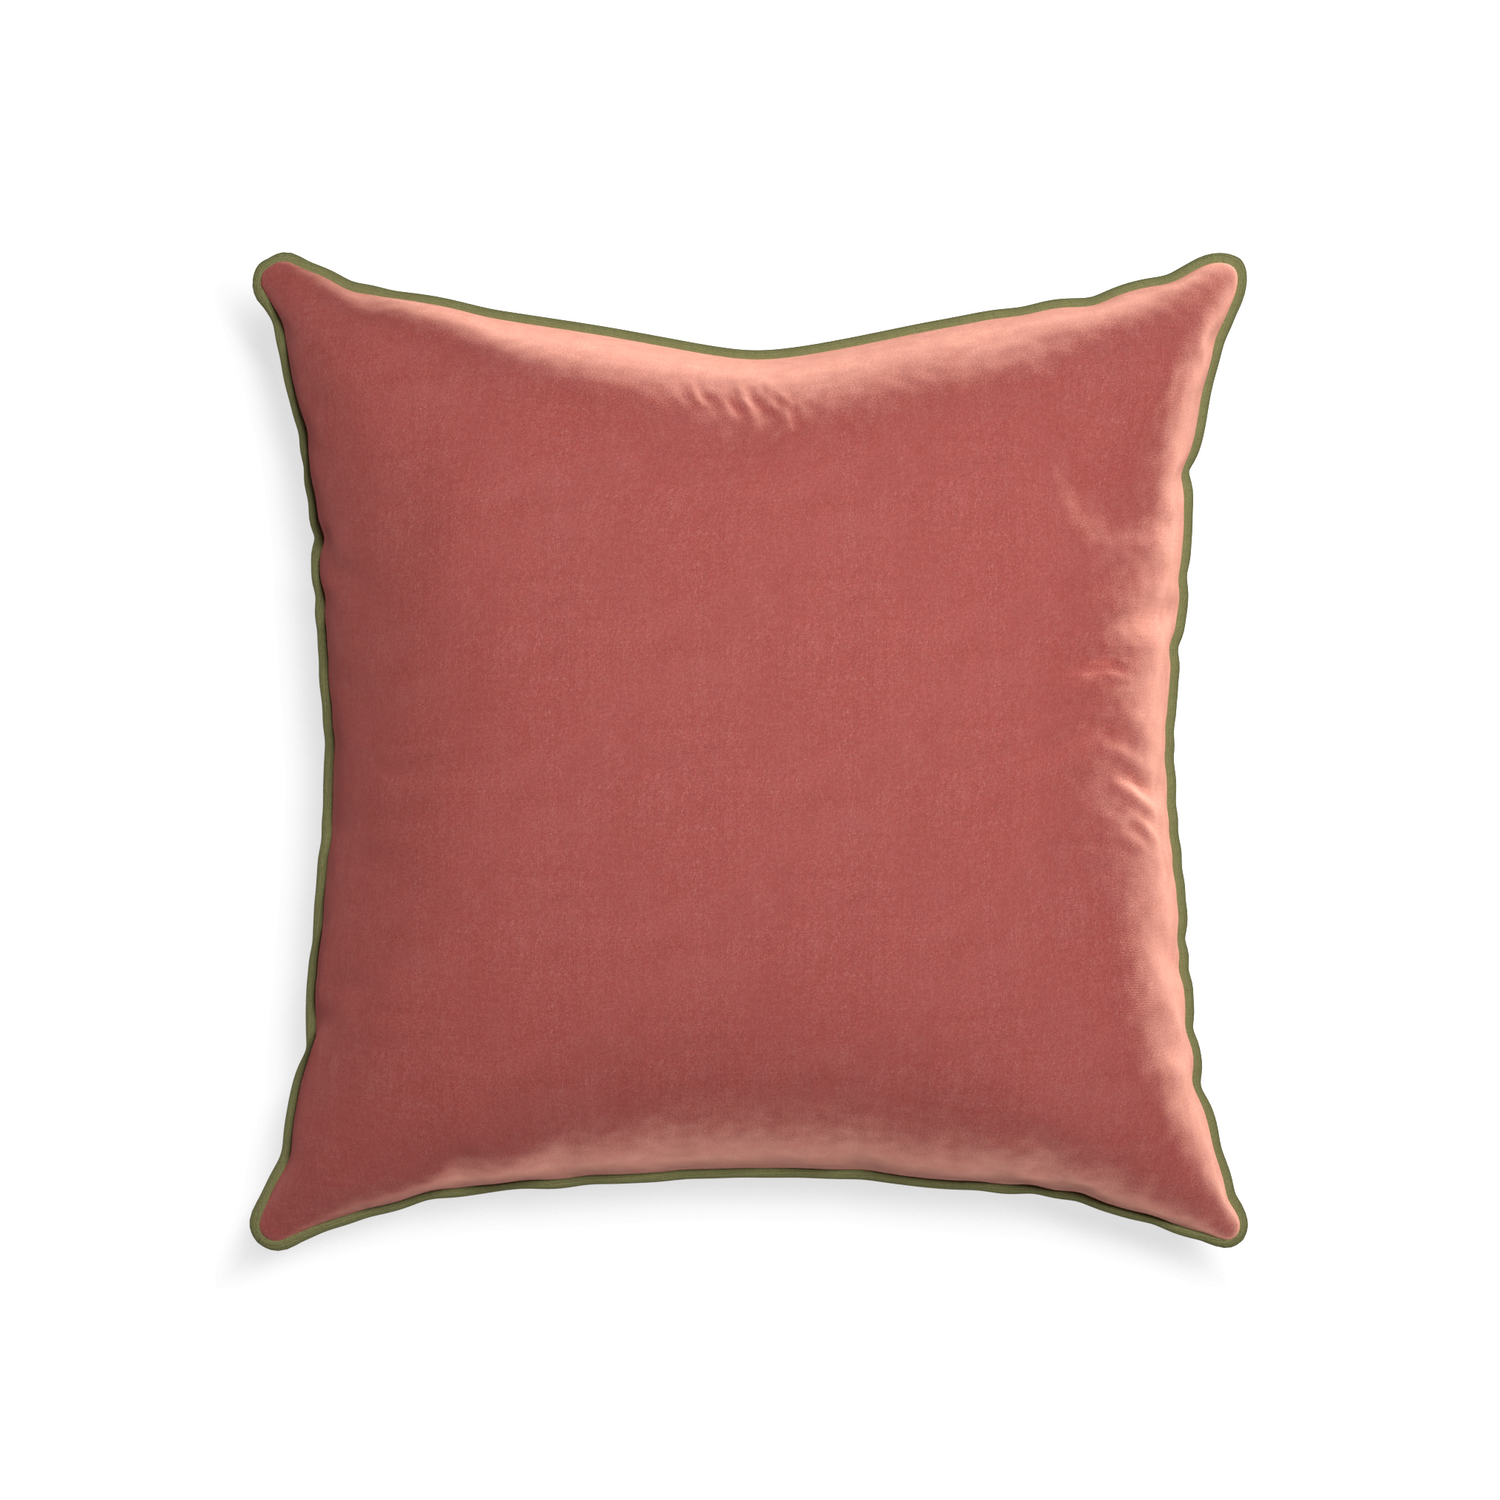 22-square cosmo velvet custom coralpillow with moss piping on white background